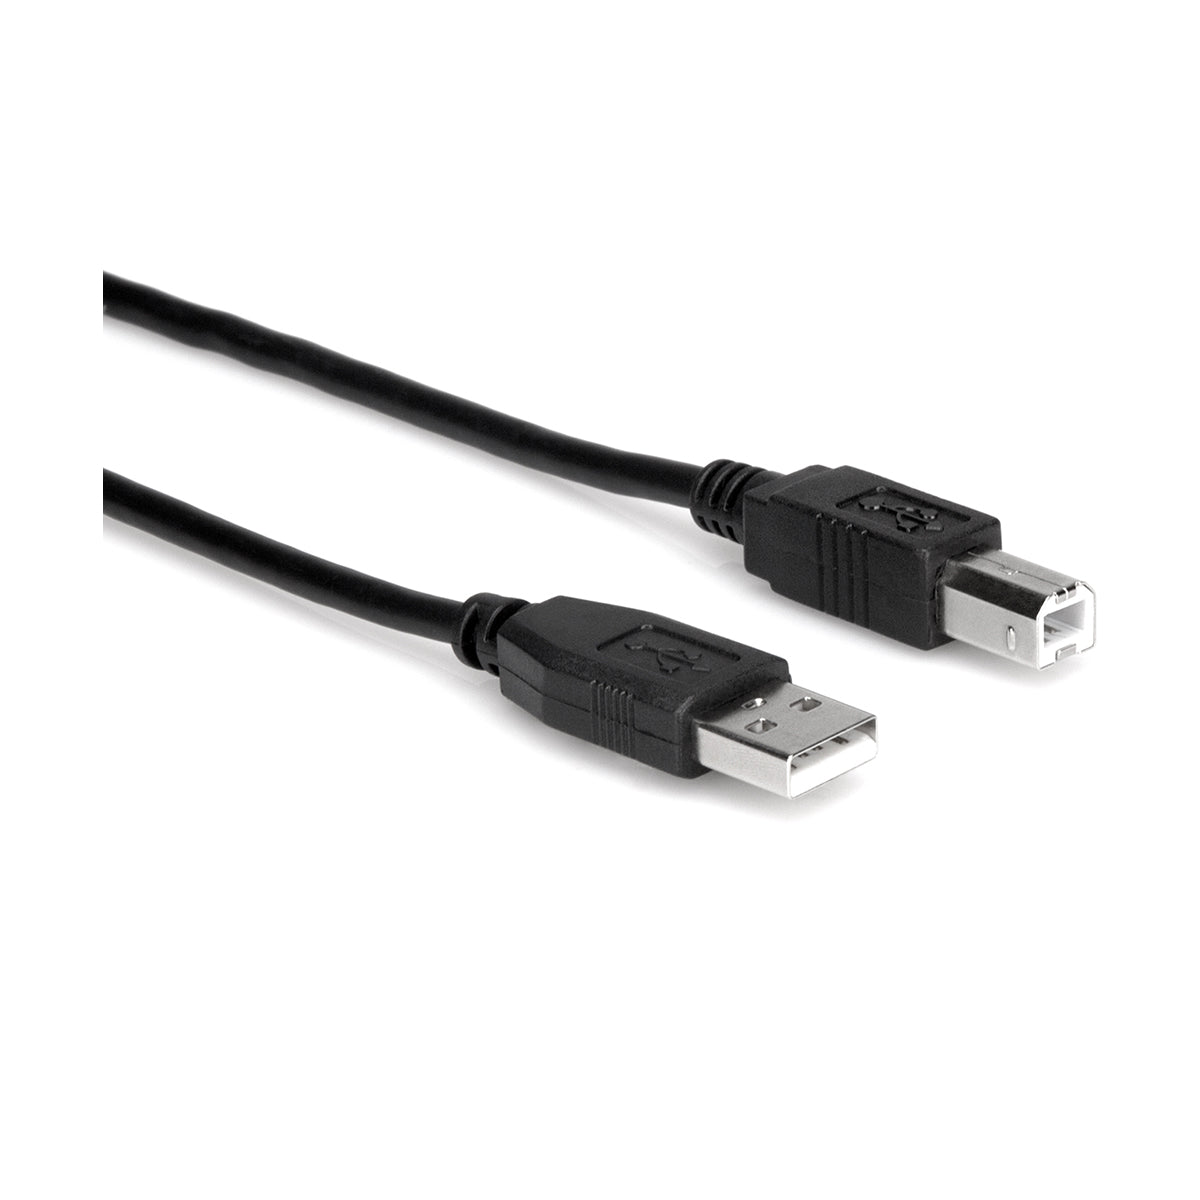 Hosa USB 2.0 Cable 10’ Type A-B